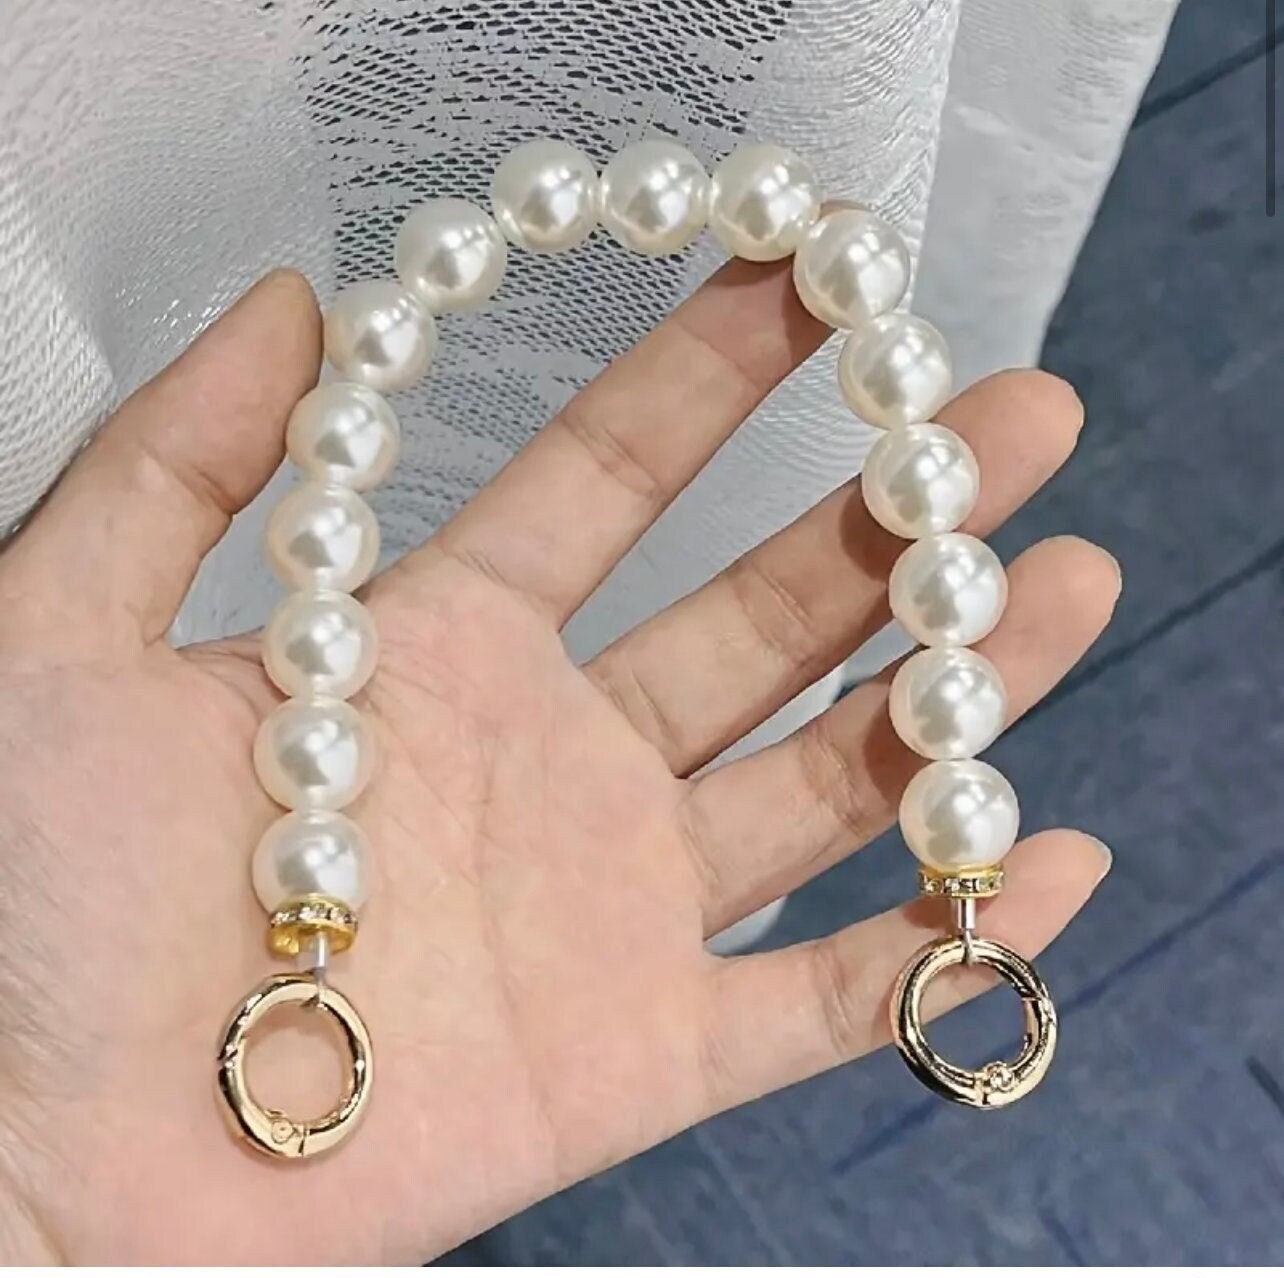 Giant Pearl Bag Strap Belt Replacement Handle pearl purse chains